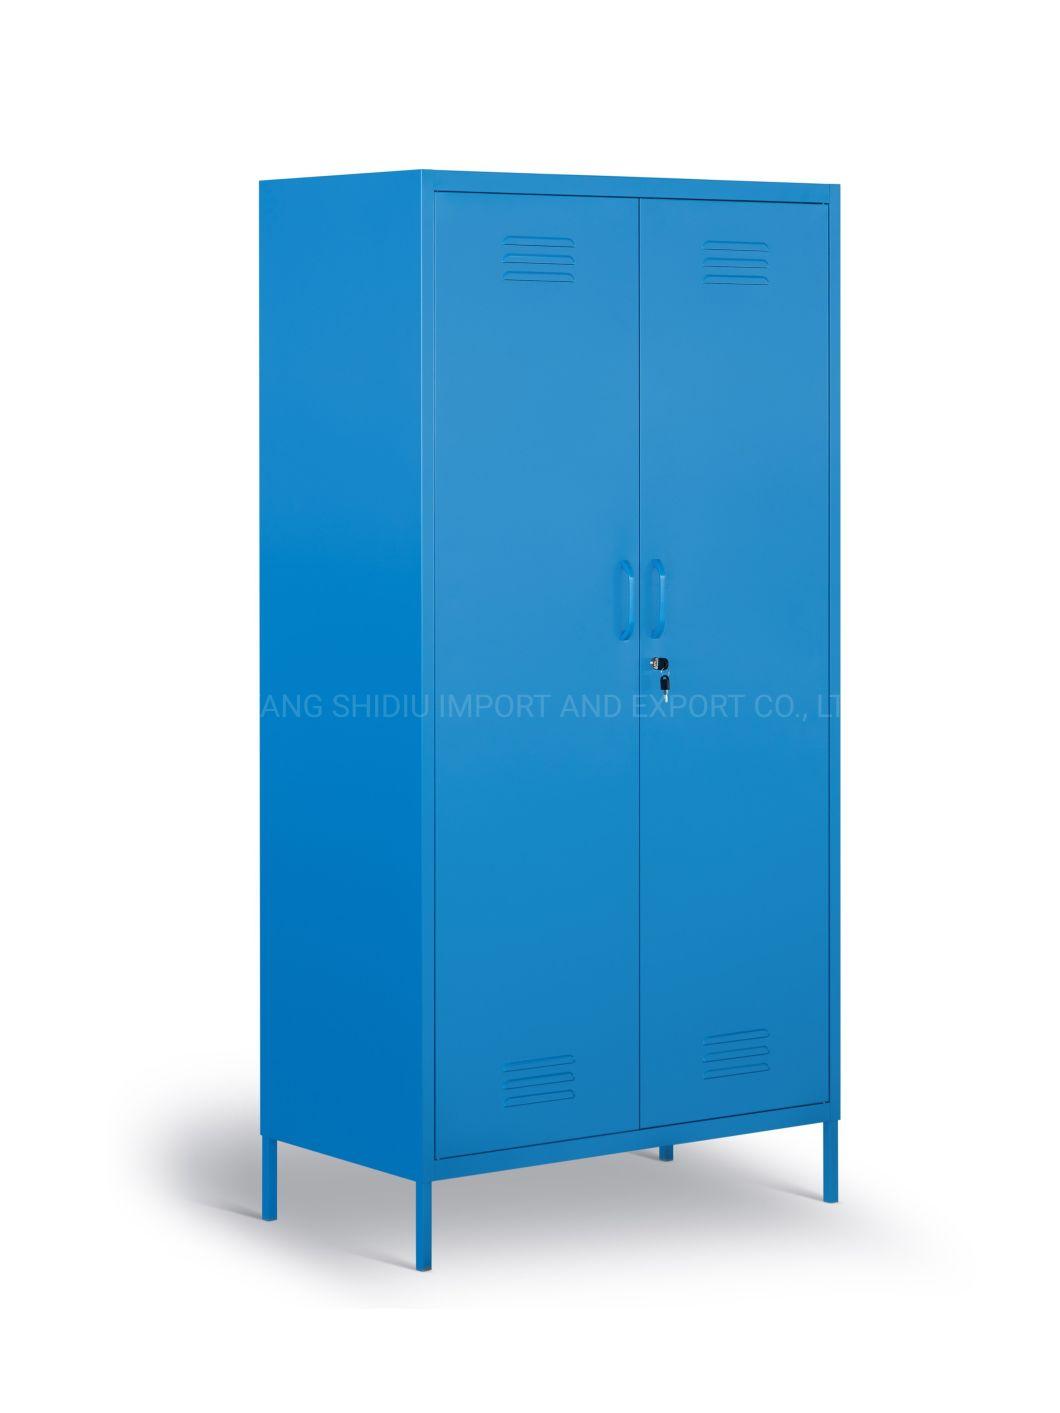 Metal Knock Down Home Furniture 2 Door Wardrobe for Clothes